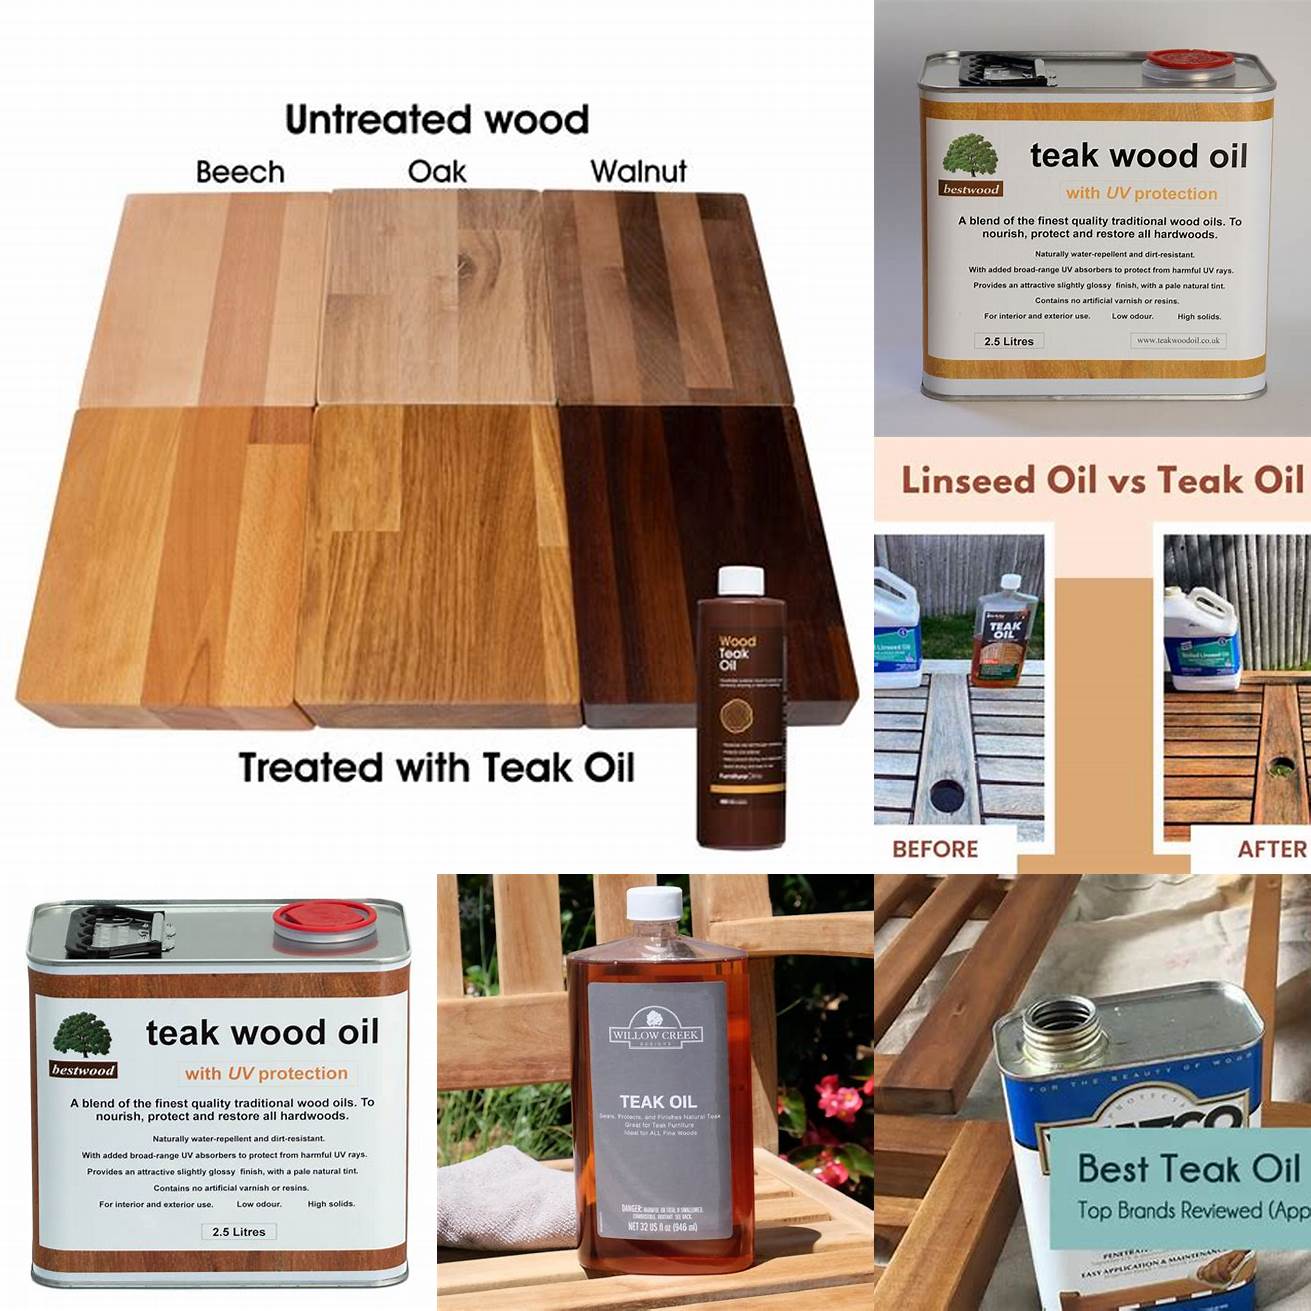 Types of Oil for Teak Outdoor Furniture